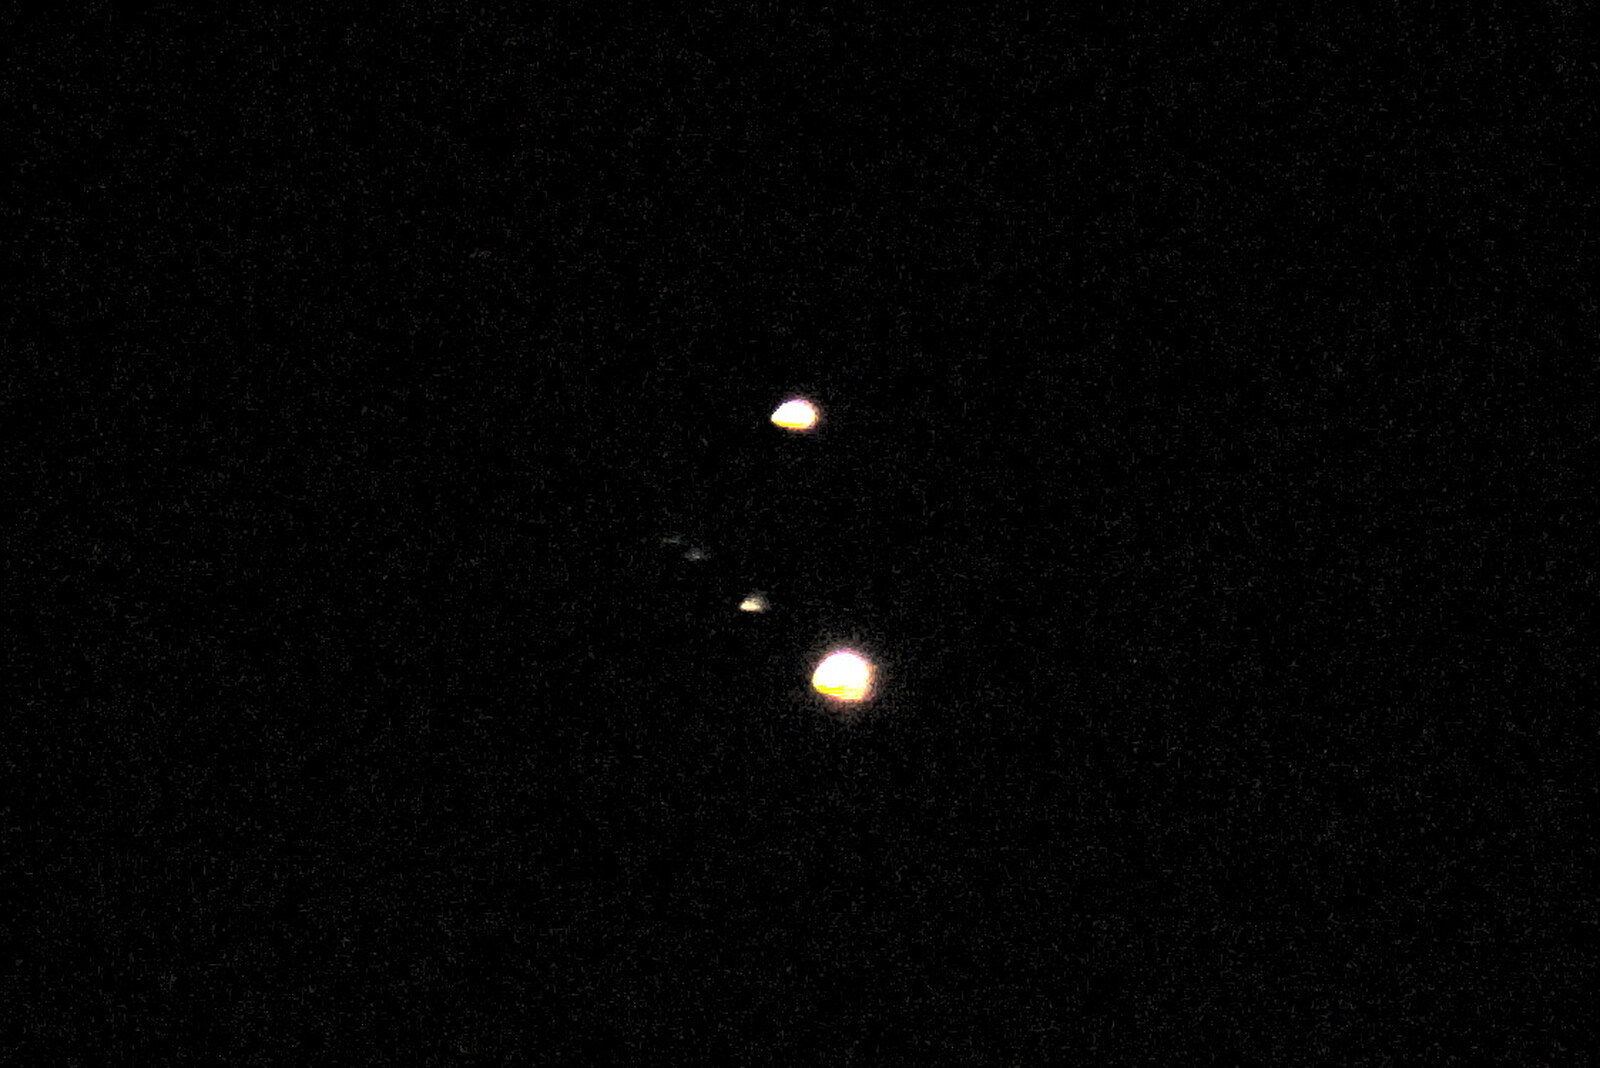 Saturn, Jupiter and its moons  from A Return to the Beach, Southwold, Suffolk - 20th December 2020